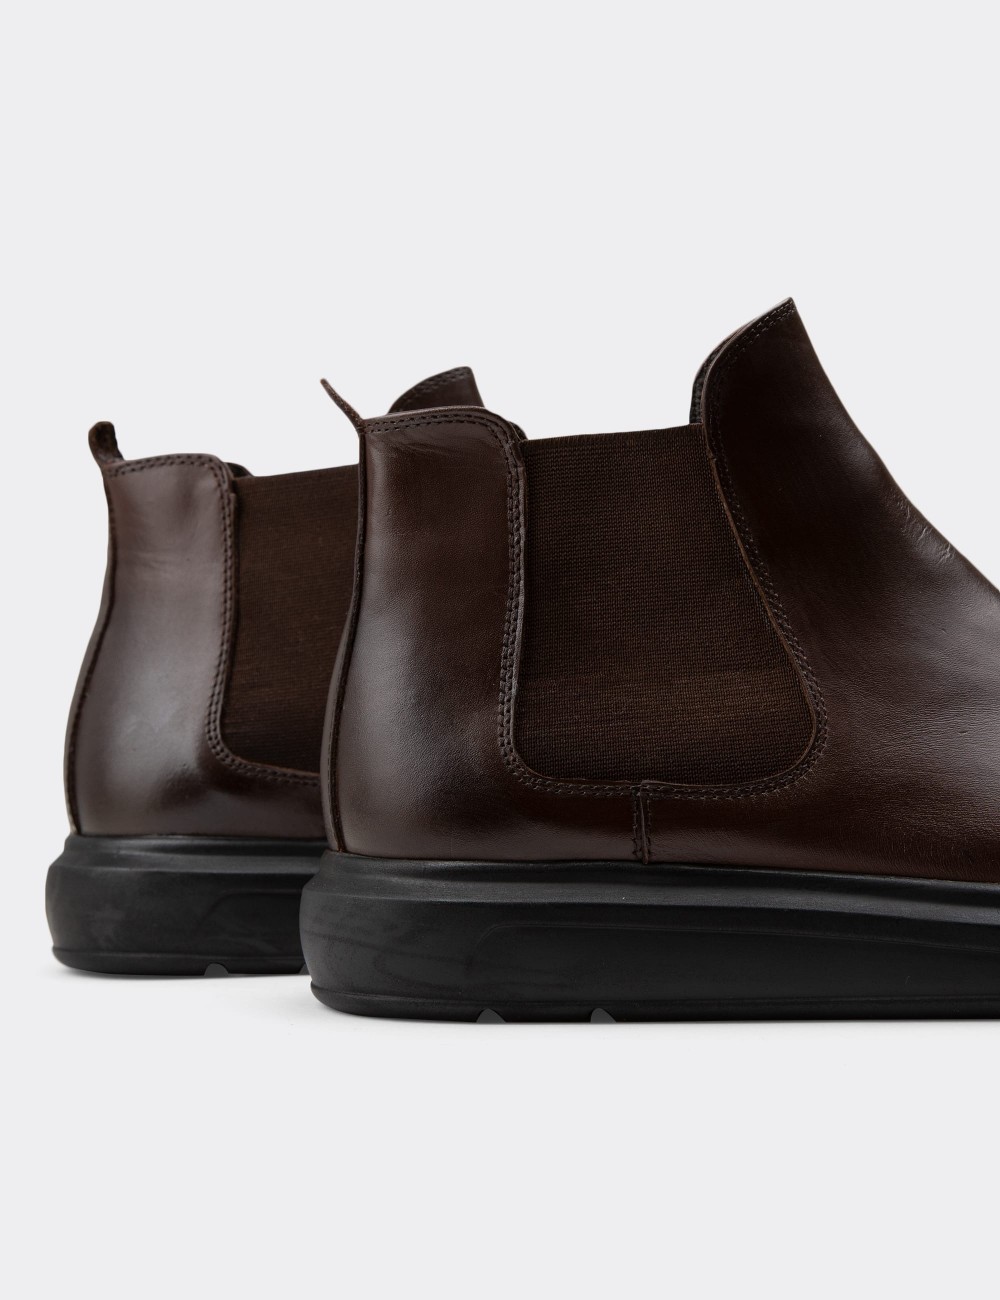 Brown Leather Chelsea Boots - 01620MKHVP11